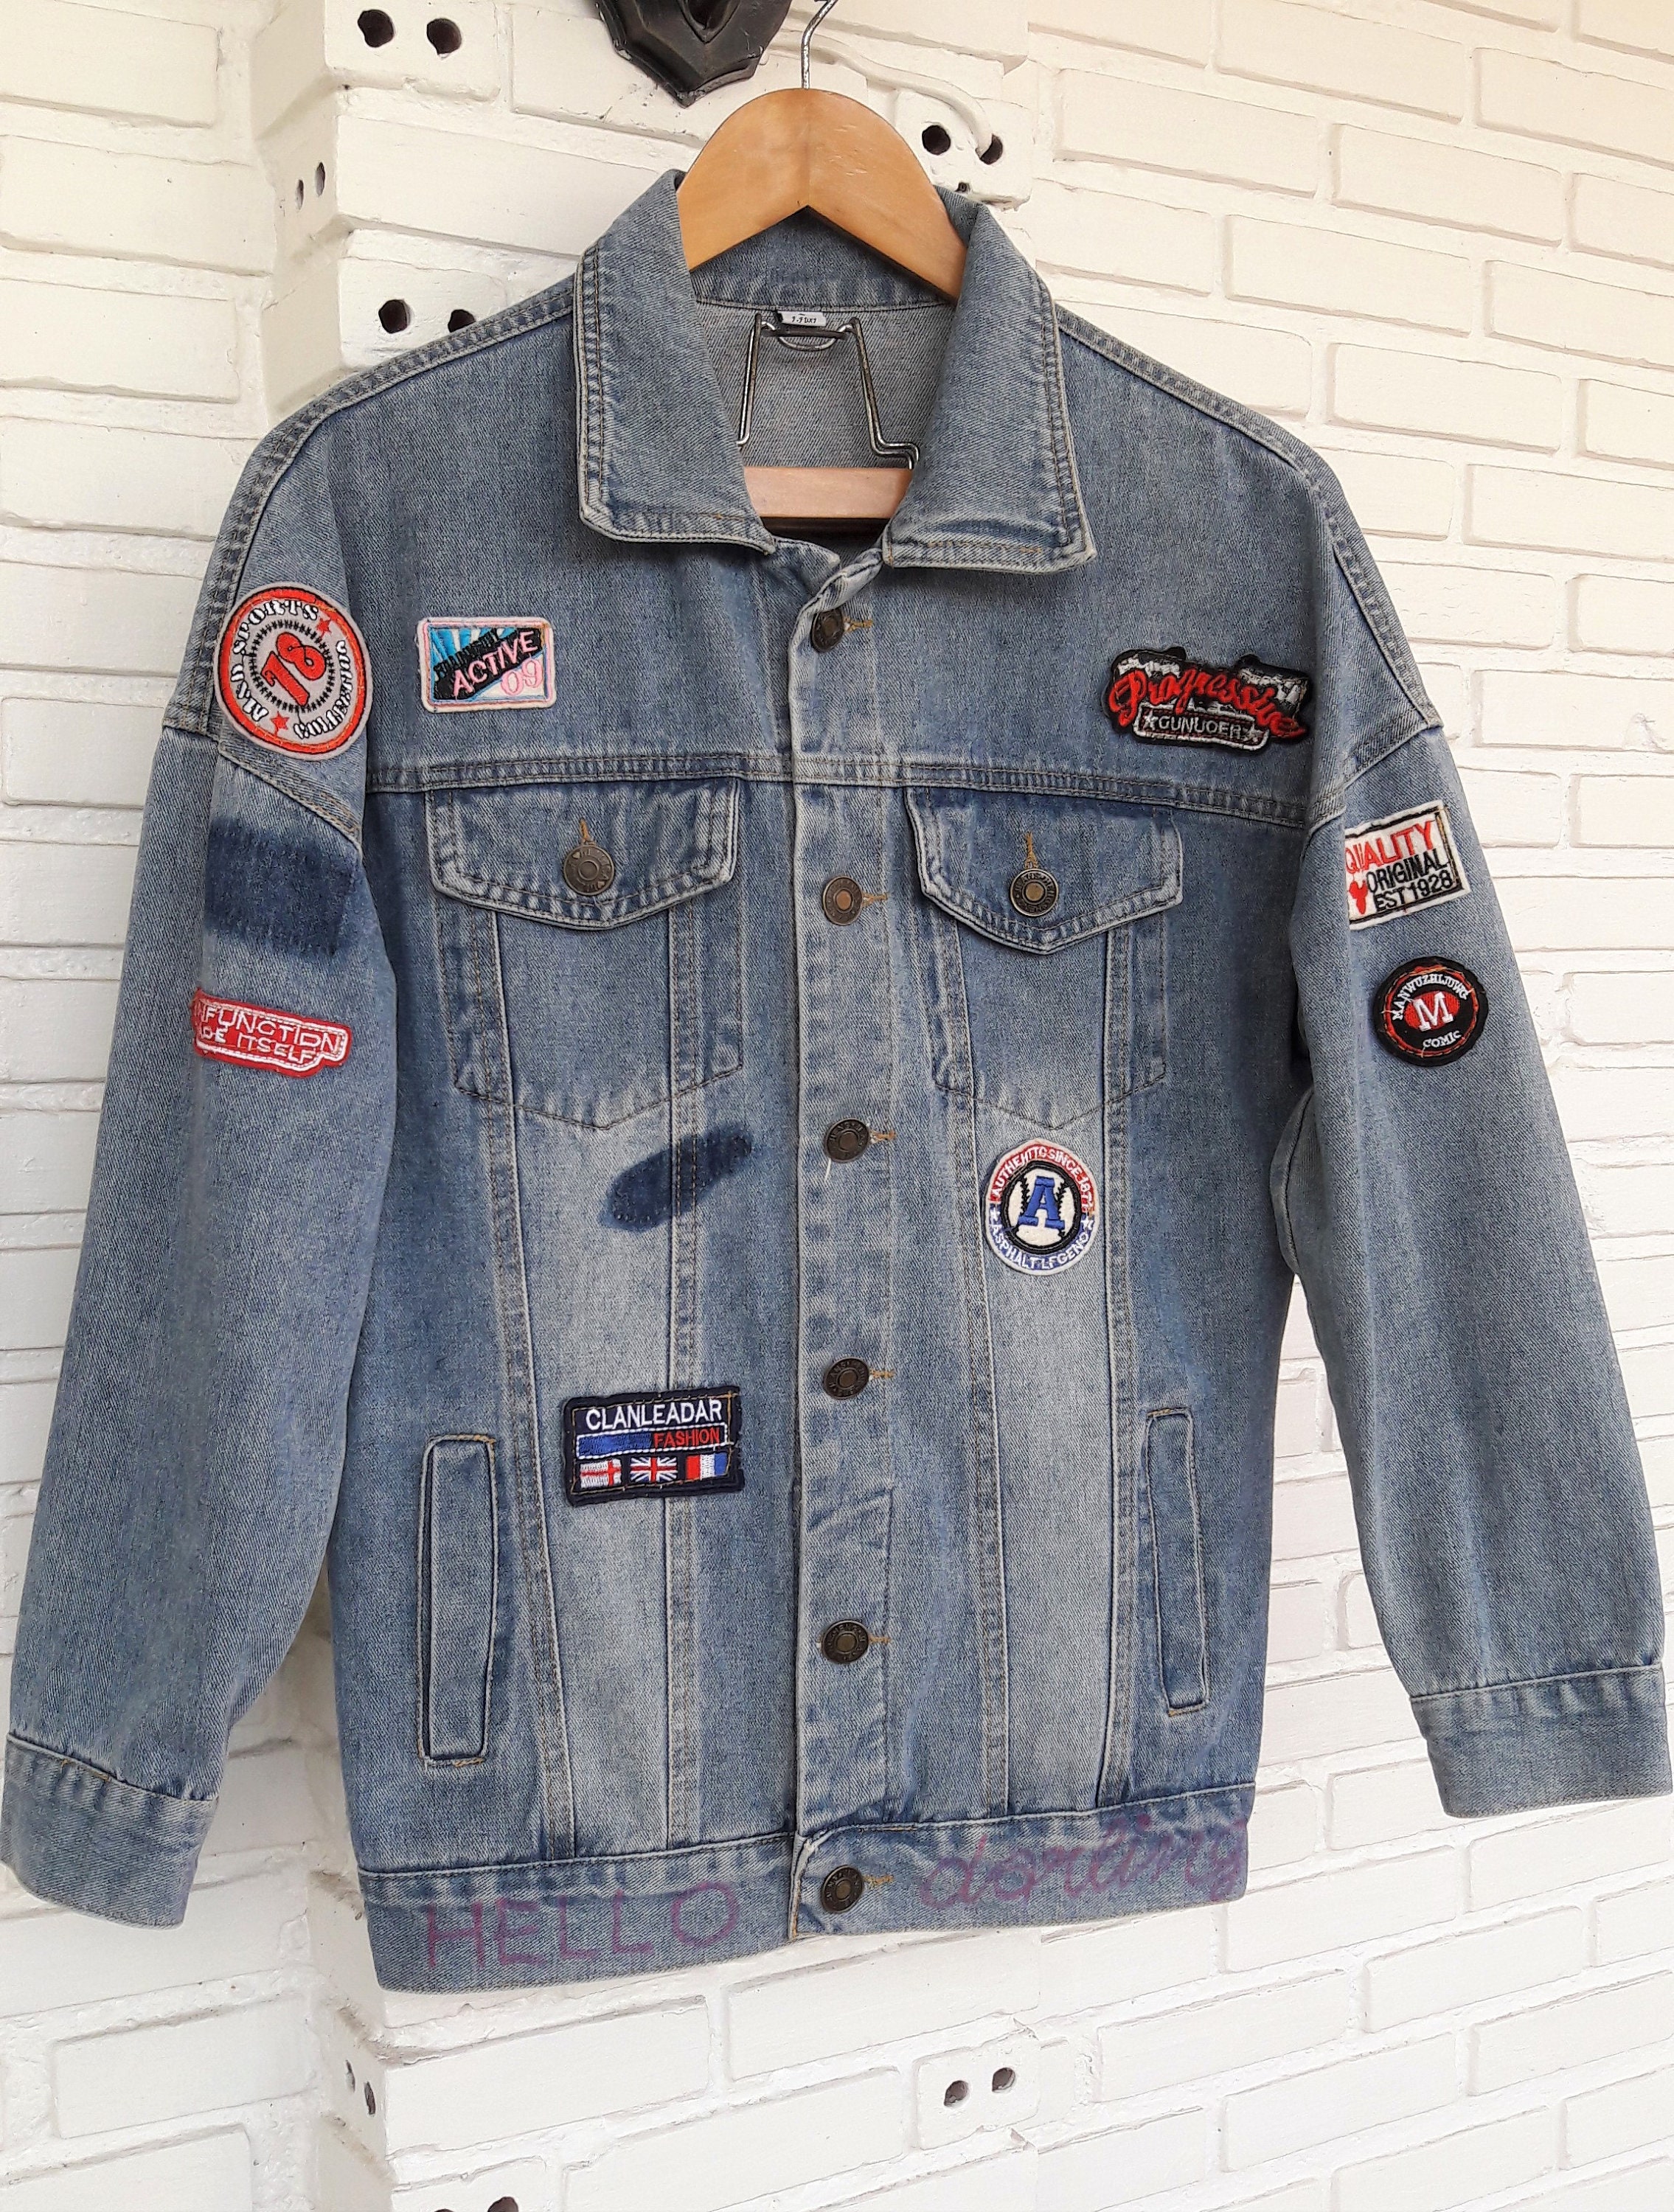 Hand Painted Jacket / Hand Painted Vintage Oversize Jean | Etsy